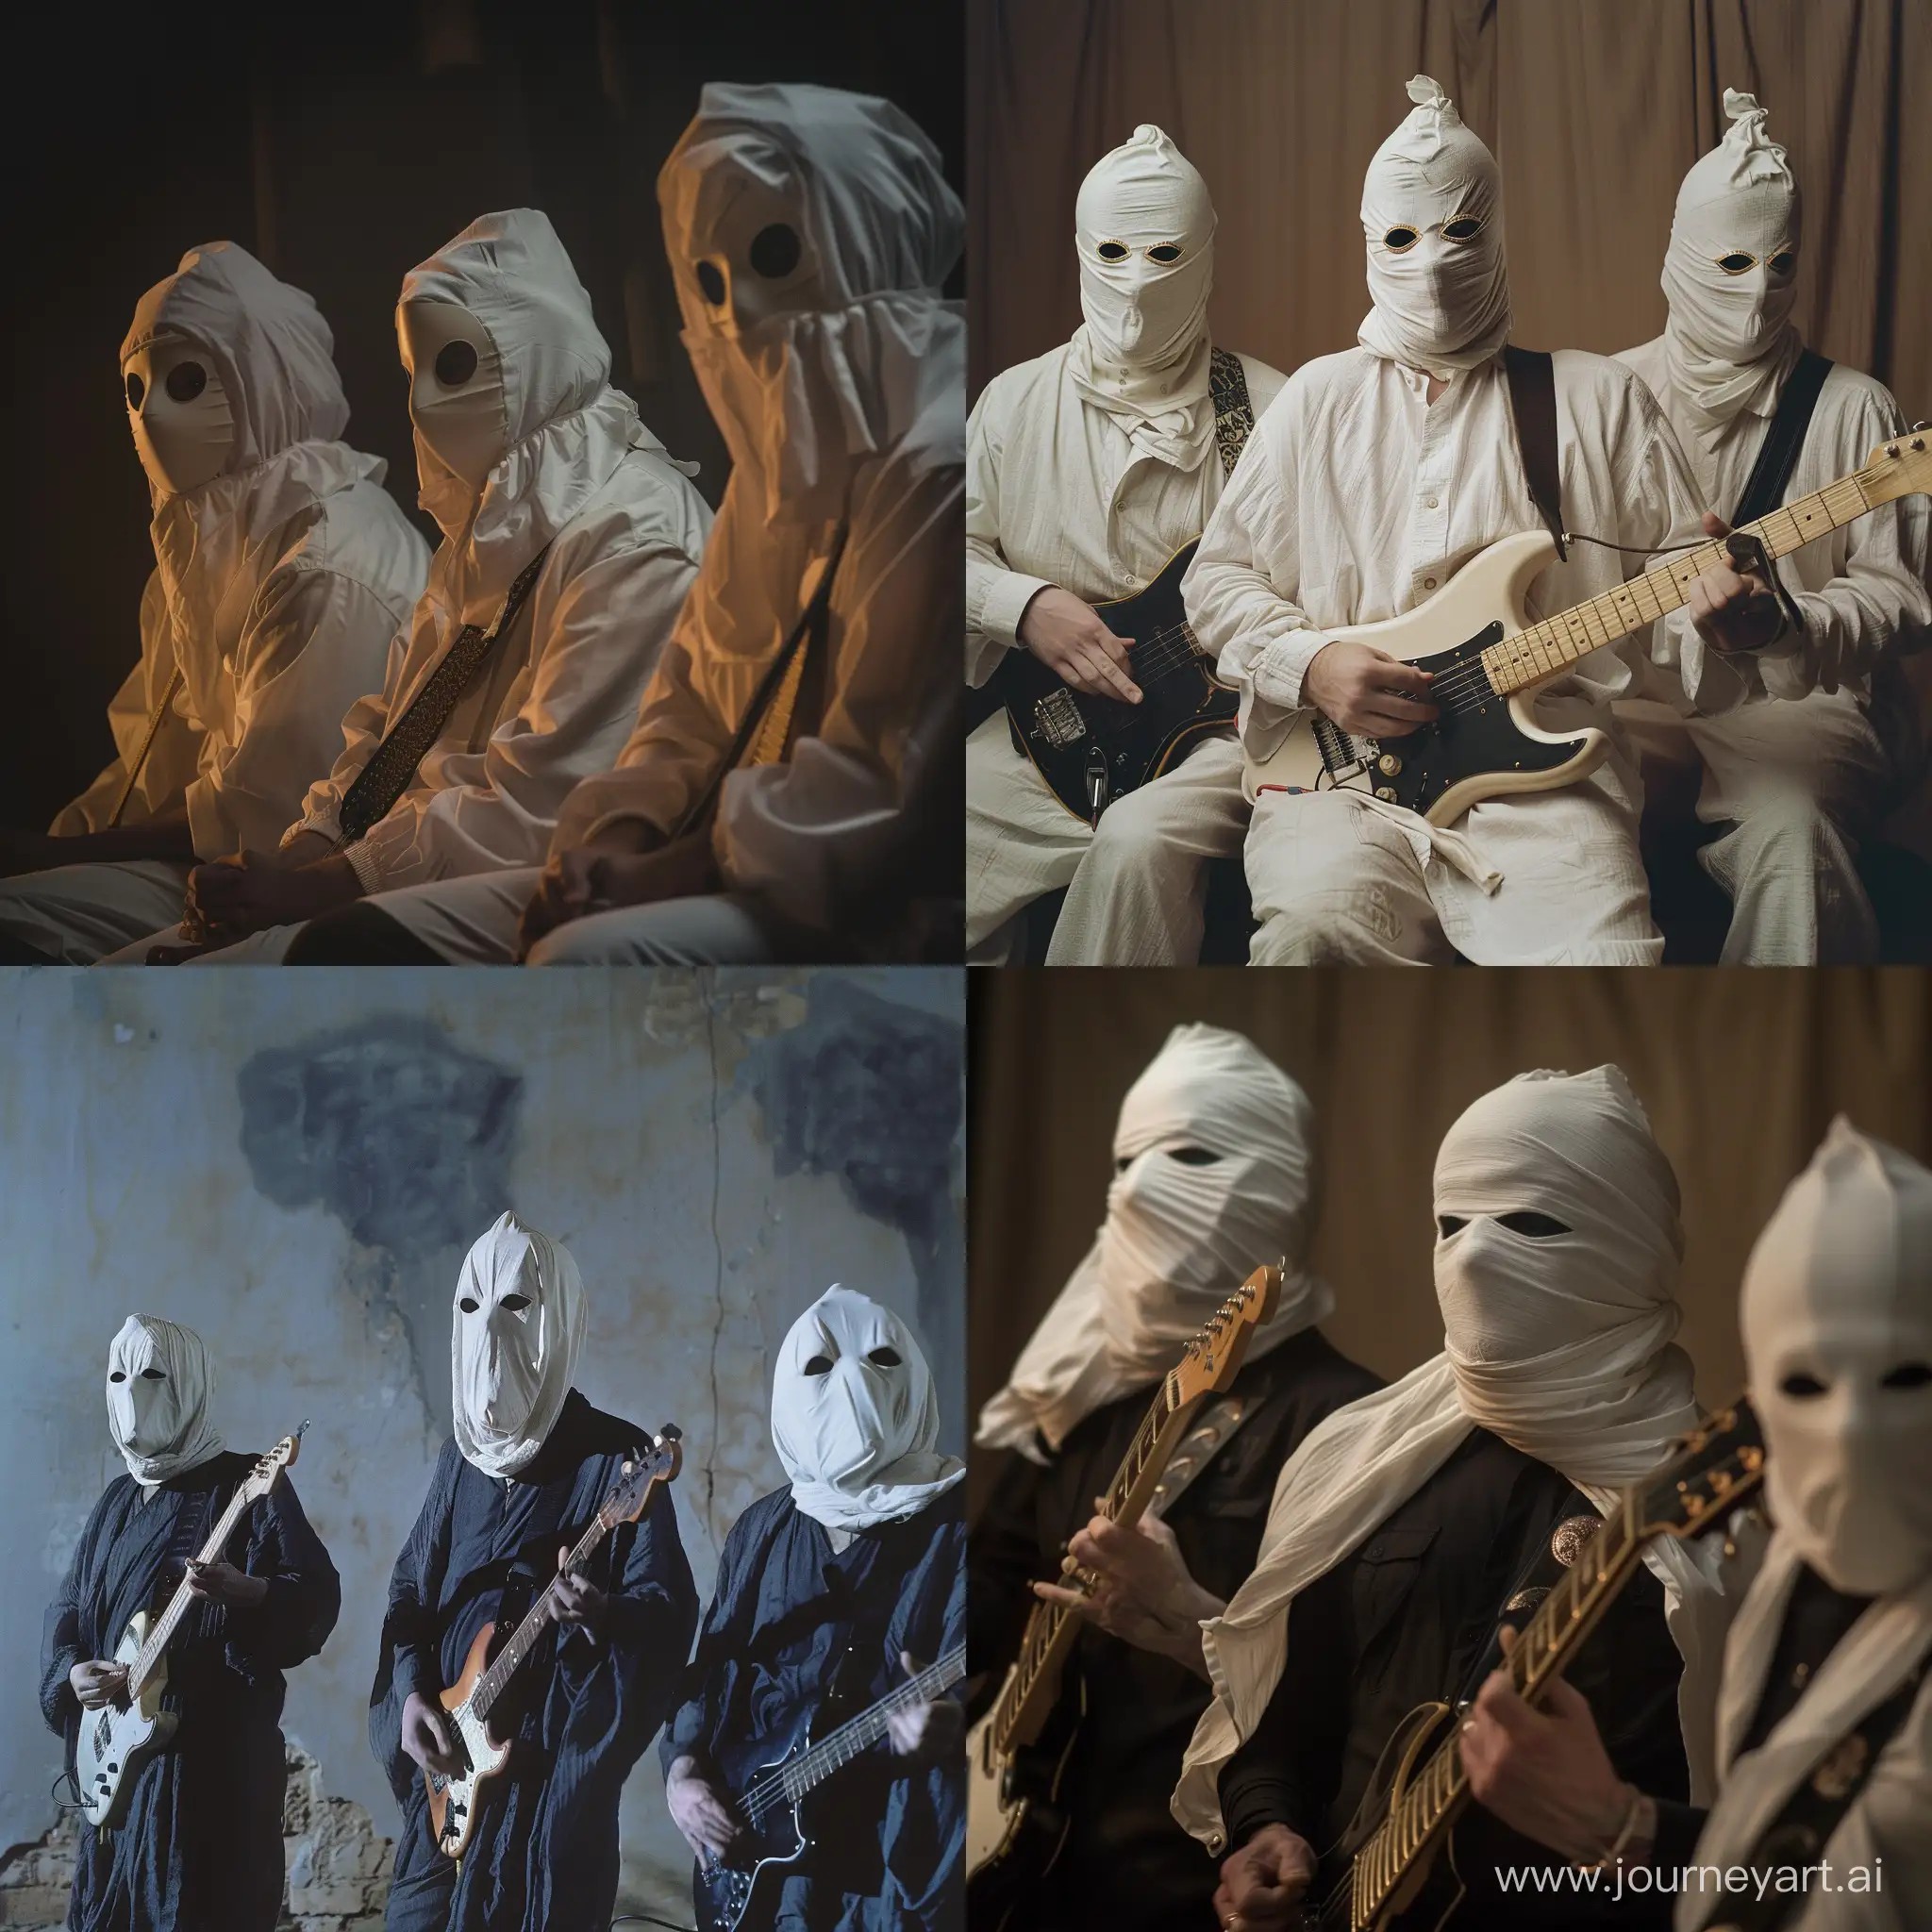 A bizarre rock recital. The band is wearing white cloth masks.